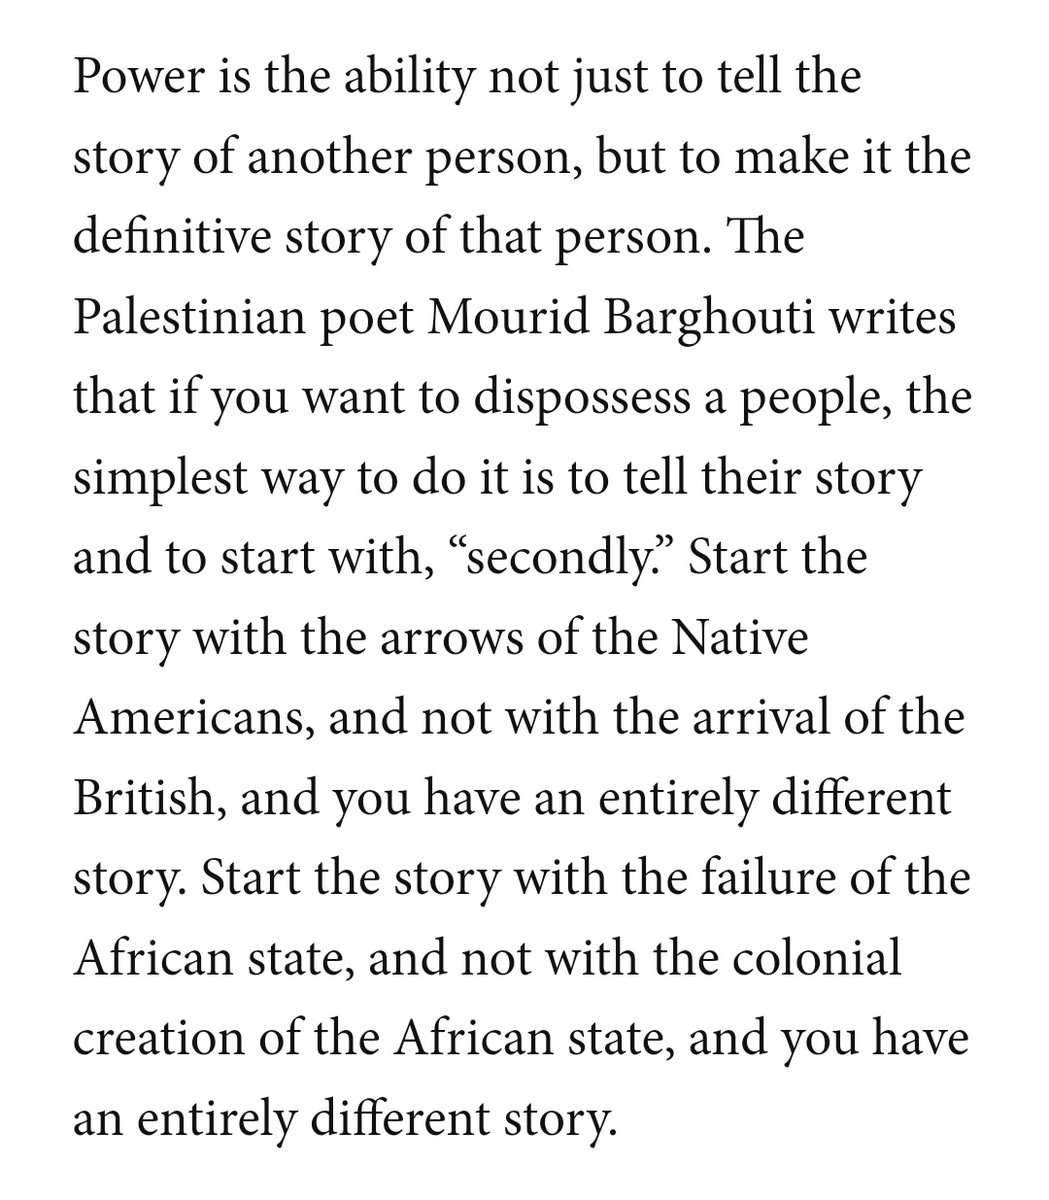 This excerpt from the widely lauded speech by @ChimamandaReal on 'The Danger of a Single Story' is so apt to the current situation in Israel & Palestine -start the story with the Hamas attack and not in 1948 and you have an entirely different story... #Gaza